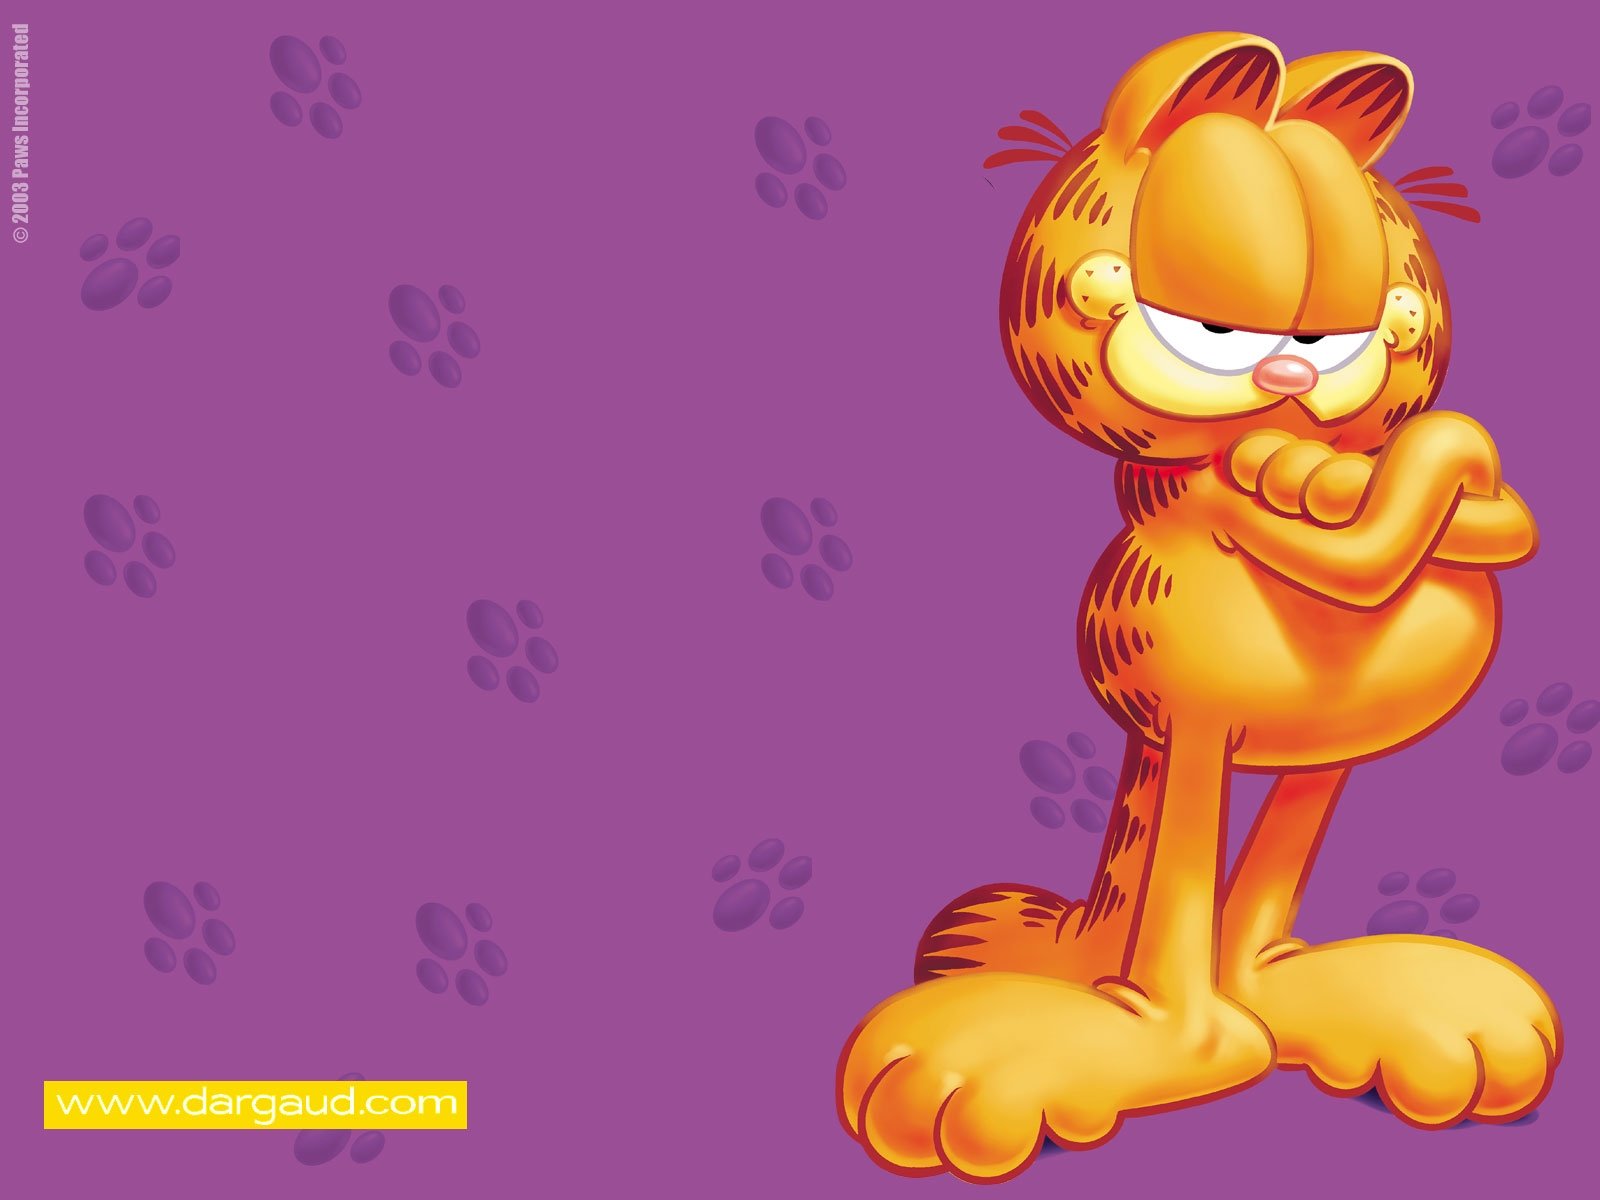 Garfield Pictures Backgrounds